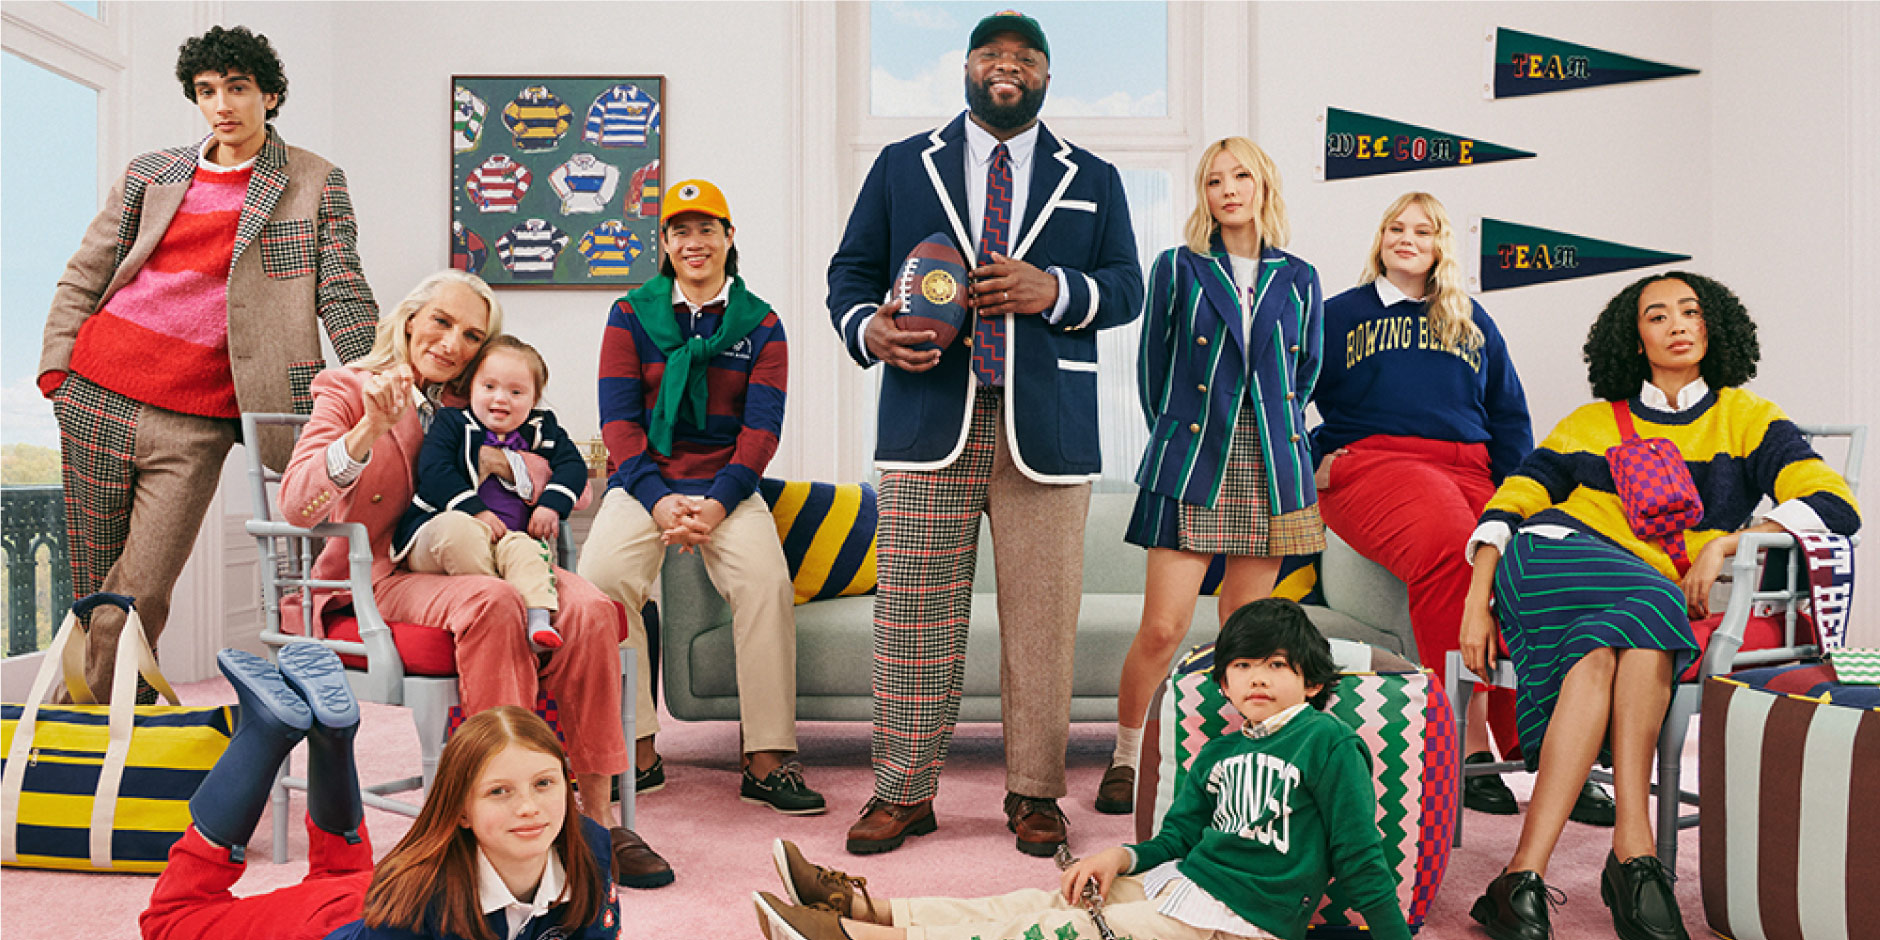 A group shot featuring models in patterned blazers and sweatshirts smiling at the camera.